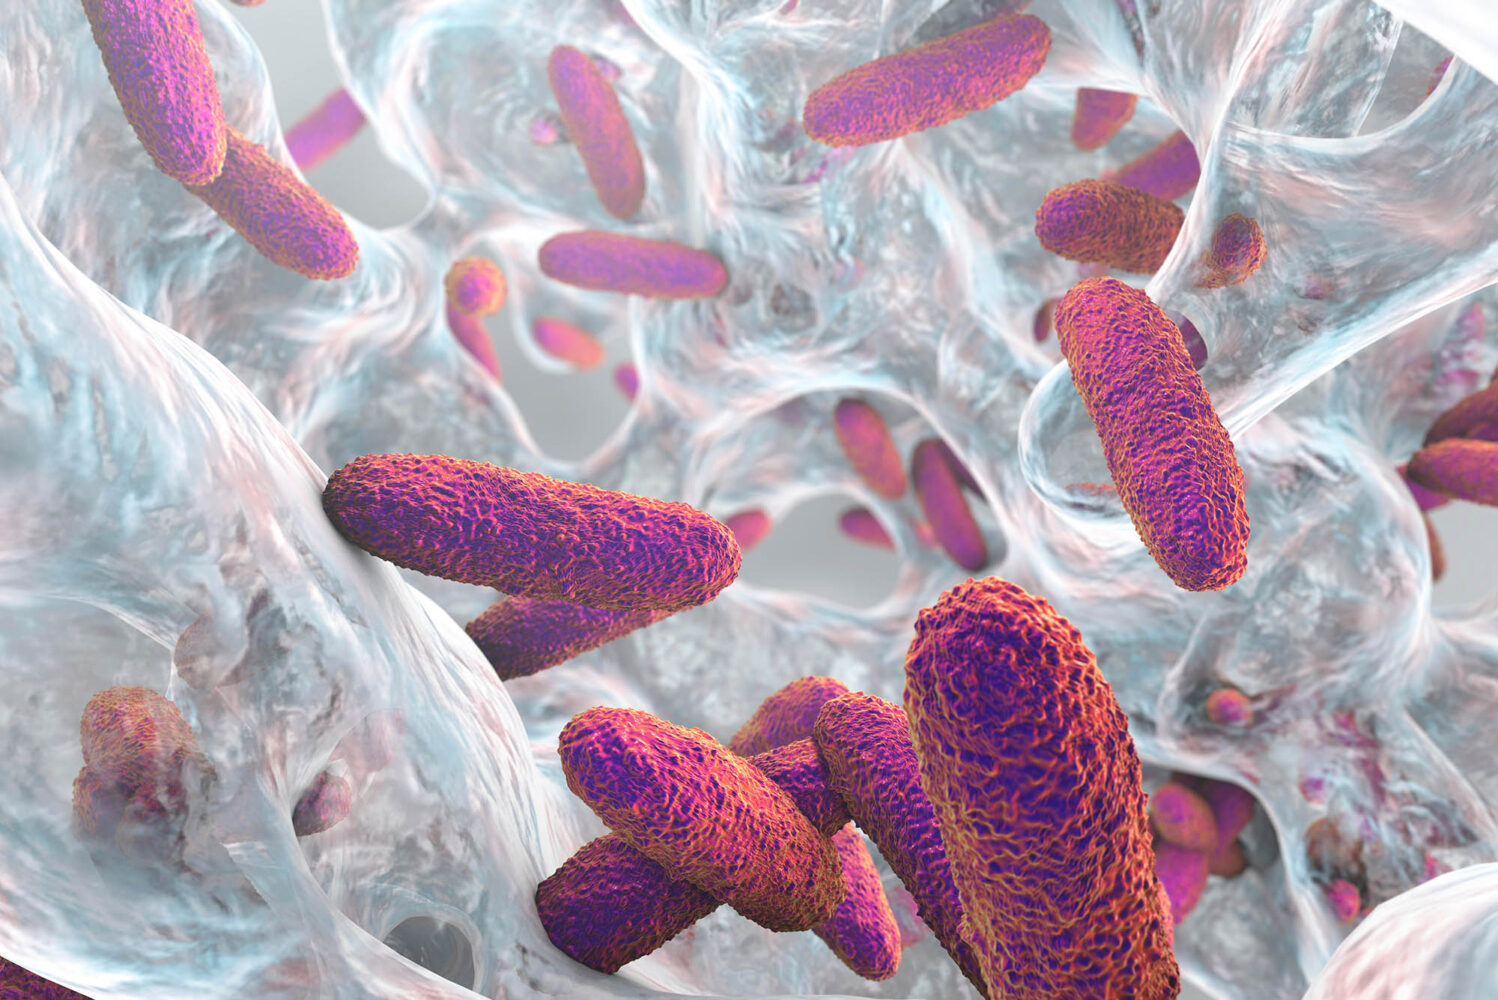 Photo: An illustration of Klebsiella pneumoniae bacteria, long cylinder-like bacteria cluttered all around.